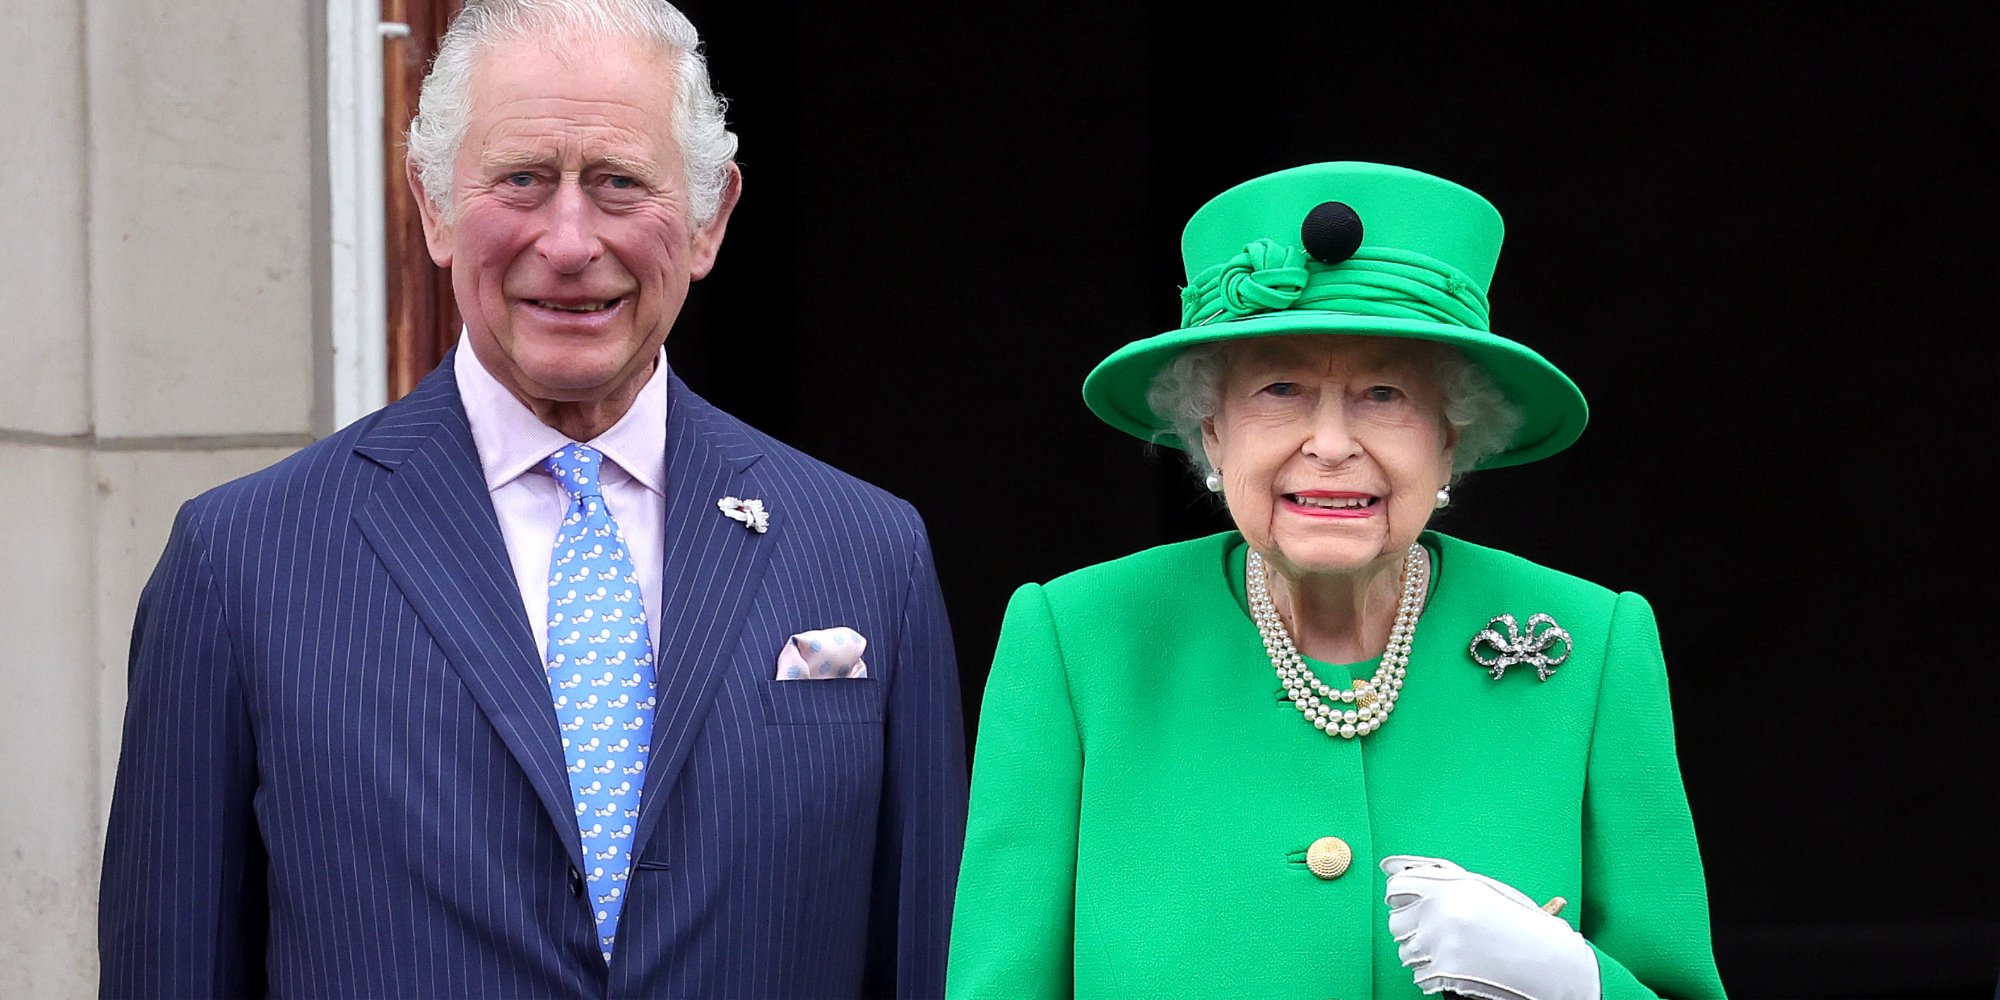 Queen Elizabeth Amassed a $500M Net Worth, but Does It All Go to King Charles III?